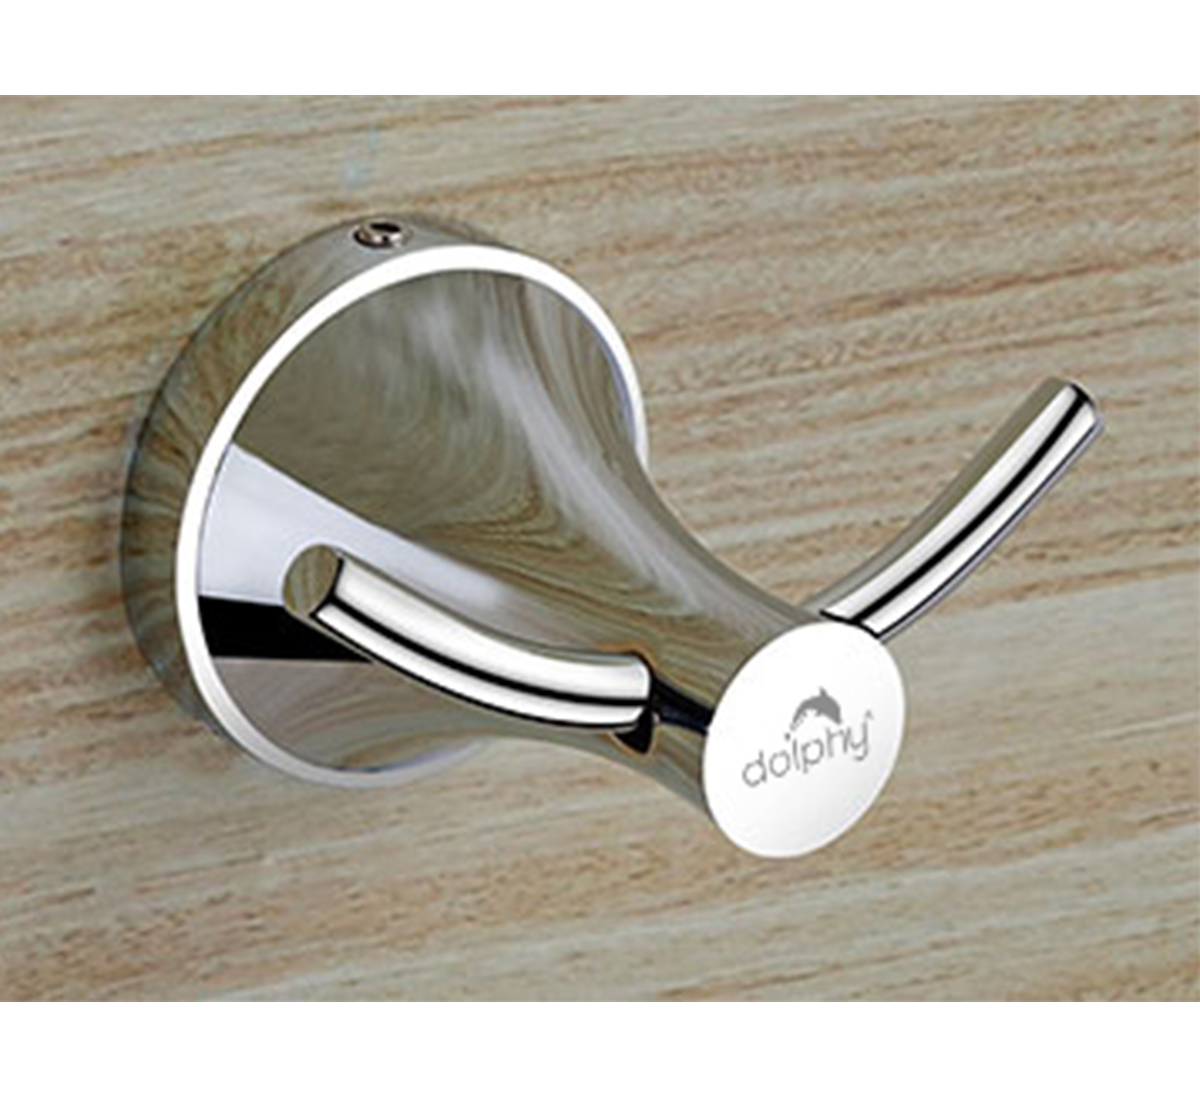 Silver wall-mounted toilet paper dispenser hook